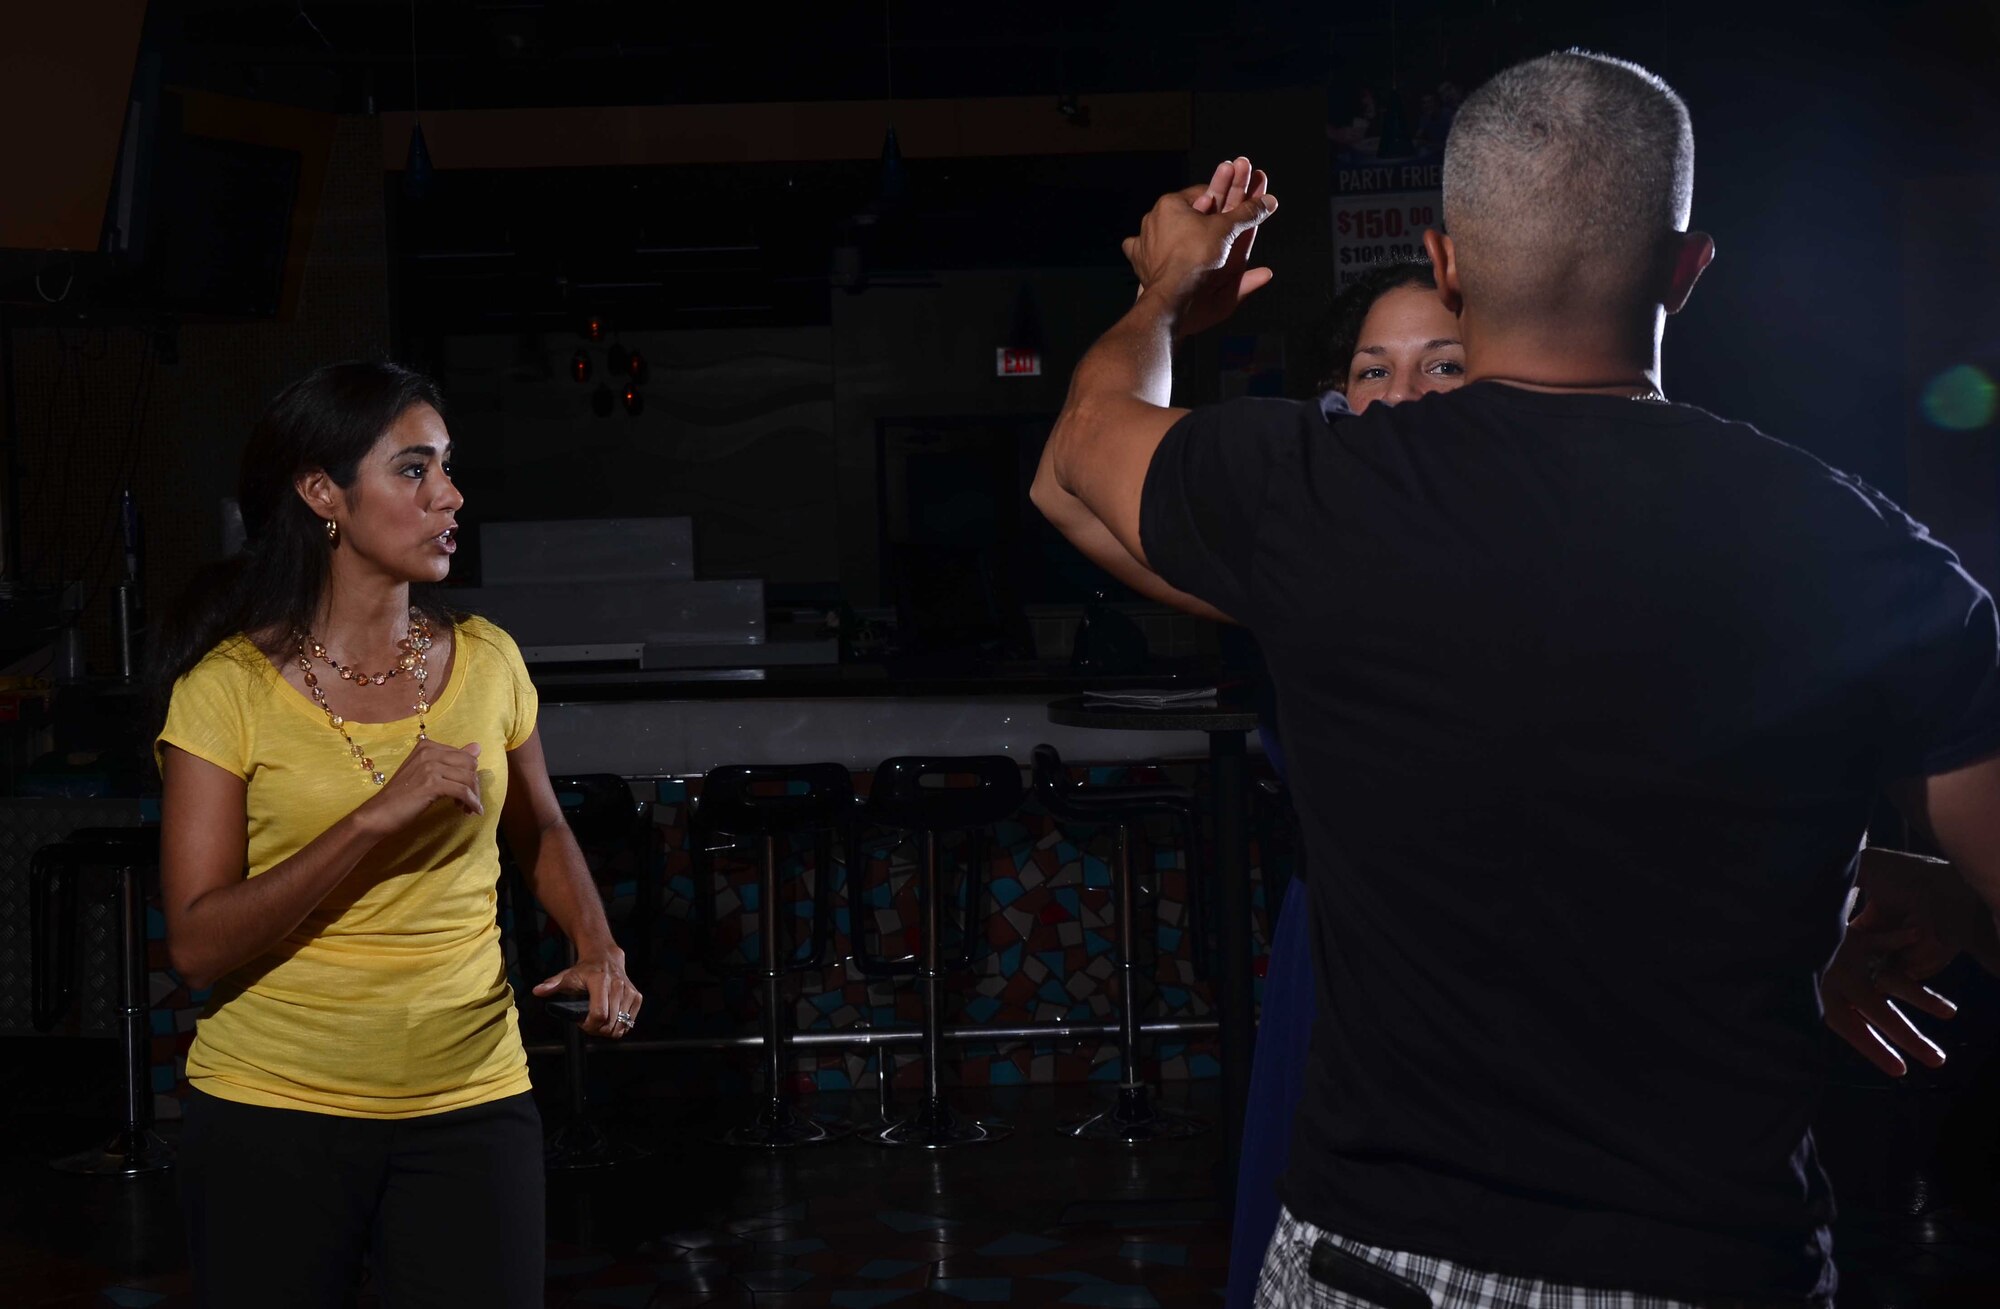 Adriana Bruton, a dance instructor on base, teaches members of Team Andersen to dance the salsa during an adult ballroom dance class on Andersen Air Force Base, Guam, June 27, 2013. Adult classes are held Tuesday and Thursday nights at the Top of the Rock on base at 7 p.m. Each month she instructs different ballroom dances, including the fox-trot, waltz, tango, salsa, rumba, swing and merengue. (U.S. Air Force photo by Staff Sgt. Veronica Montes/Released)